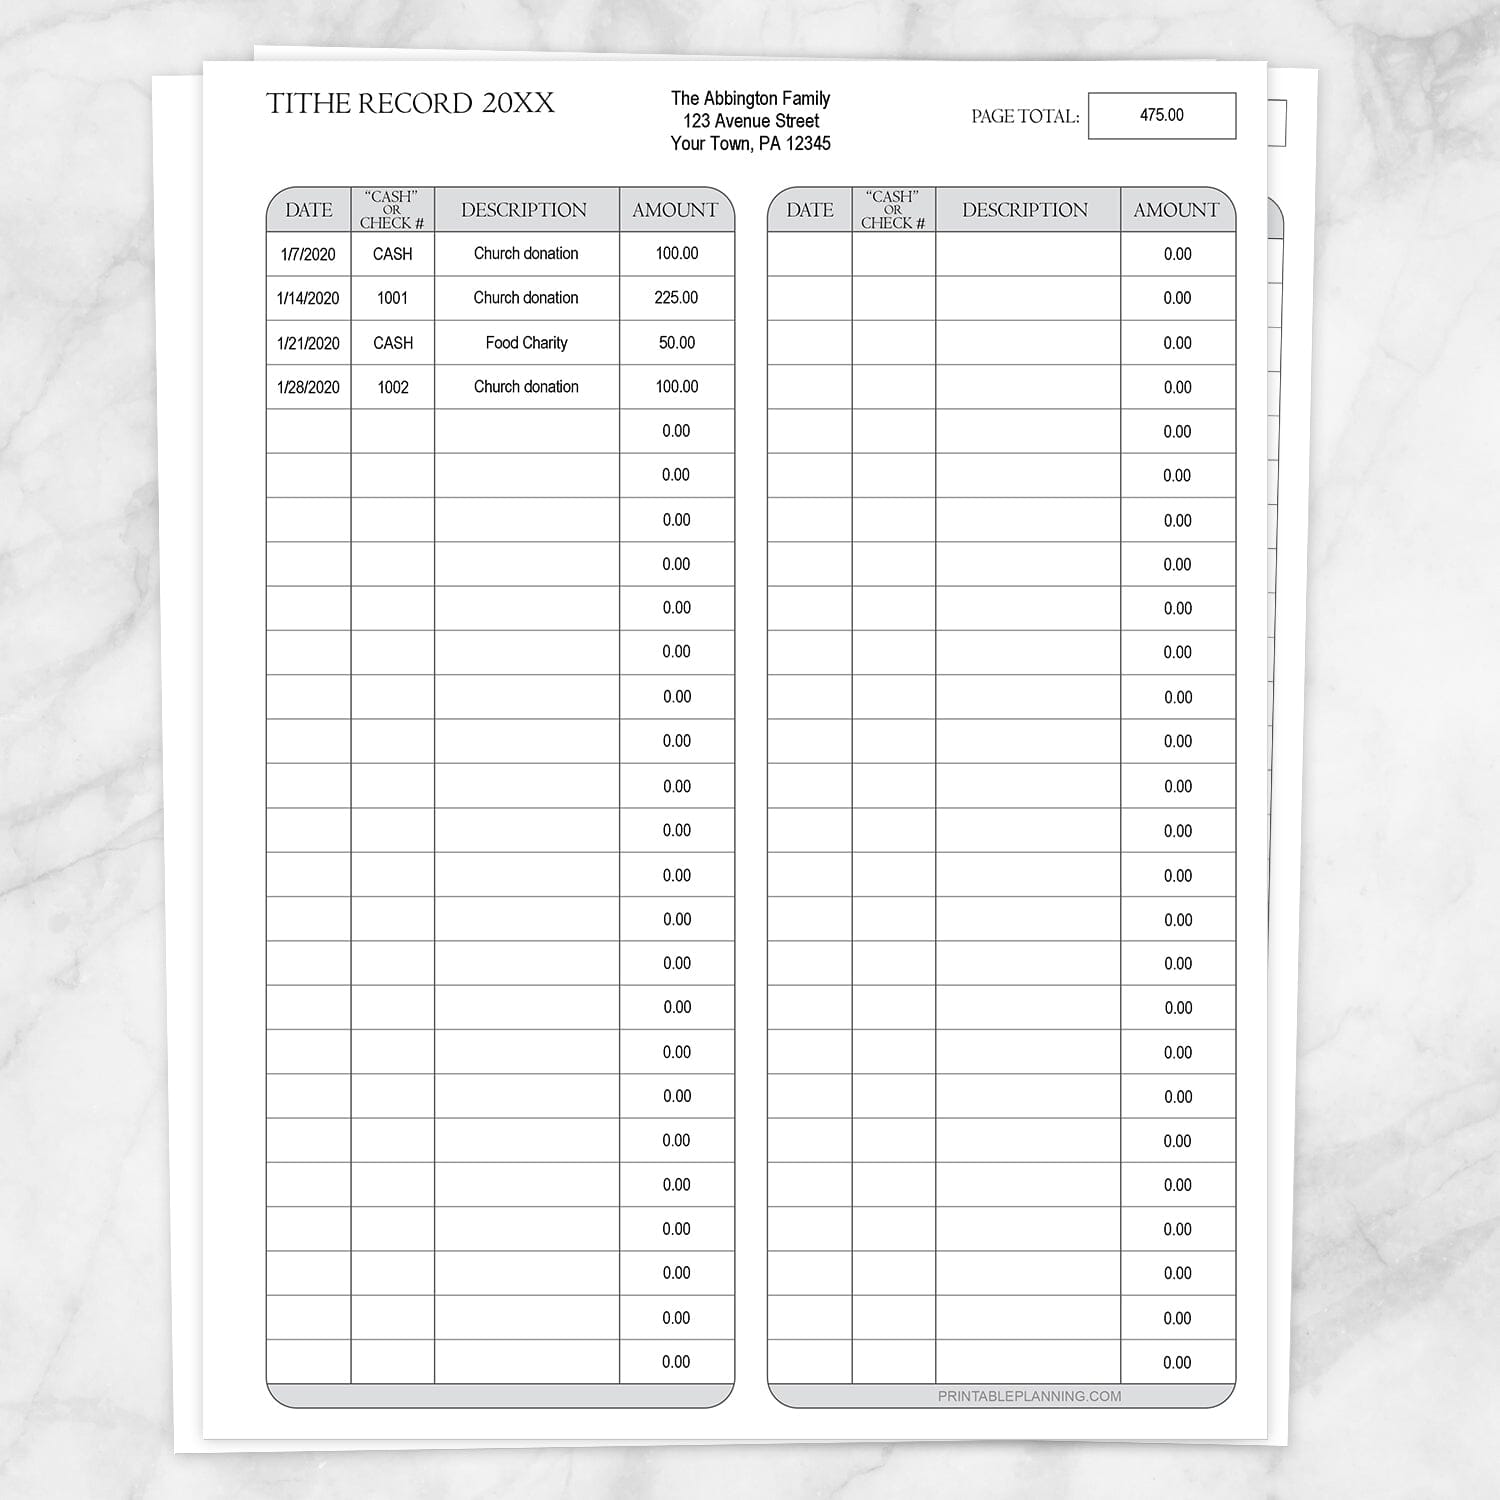 Printable Tithe Record with Auto-Calculating Total at Printable Planning